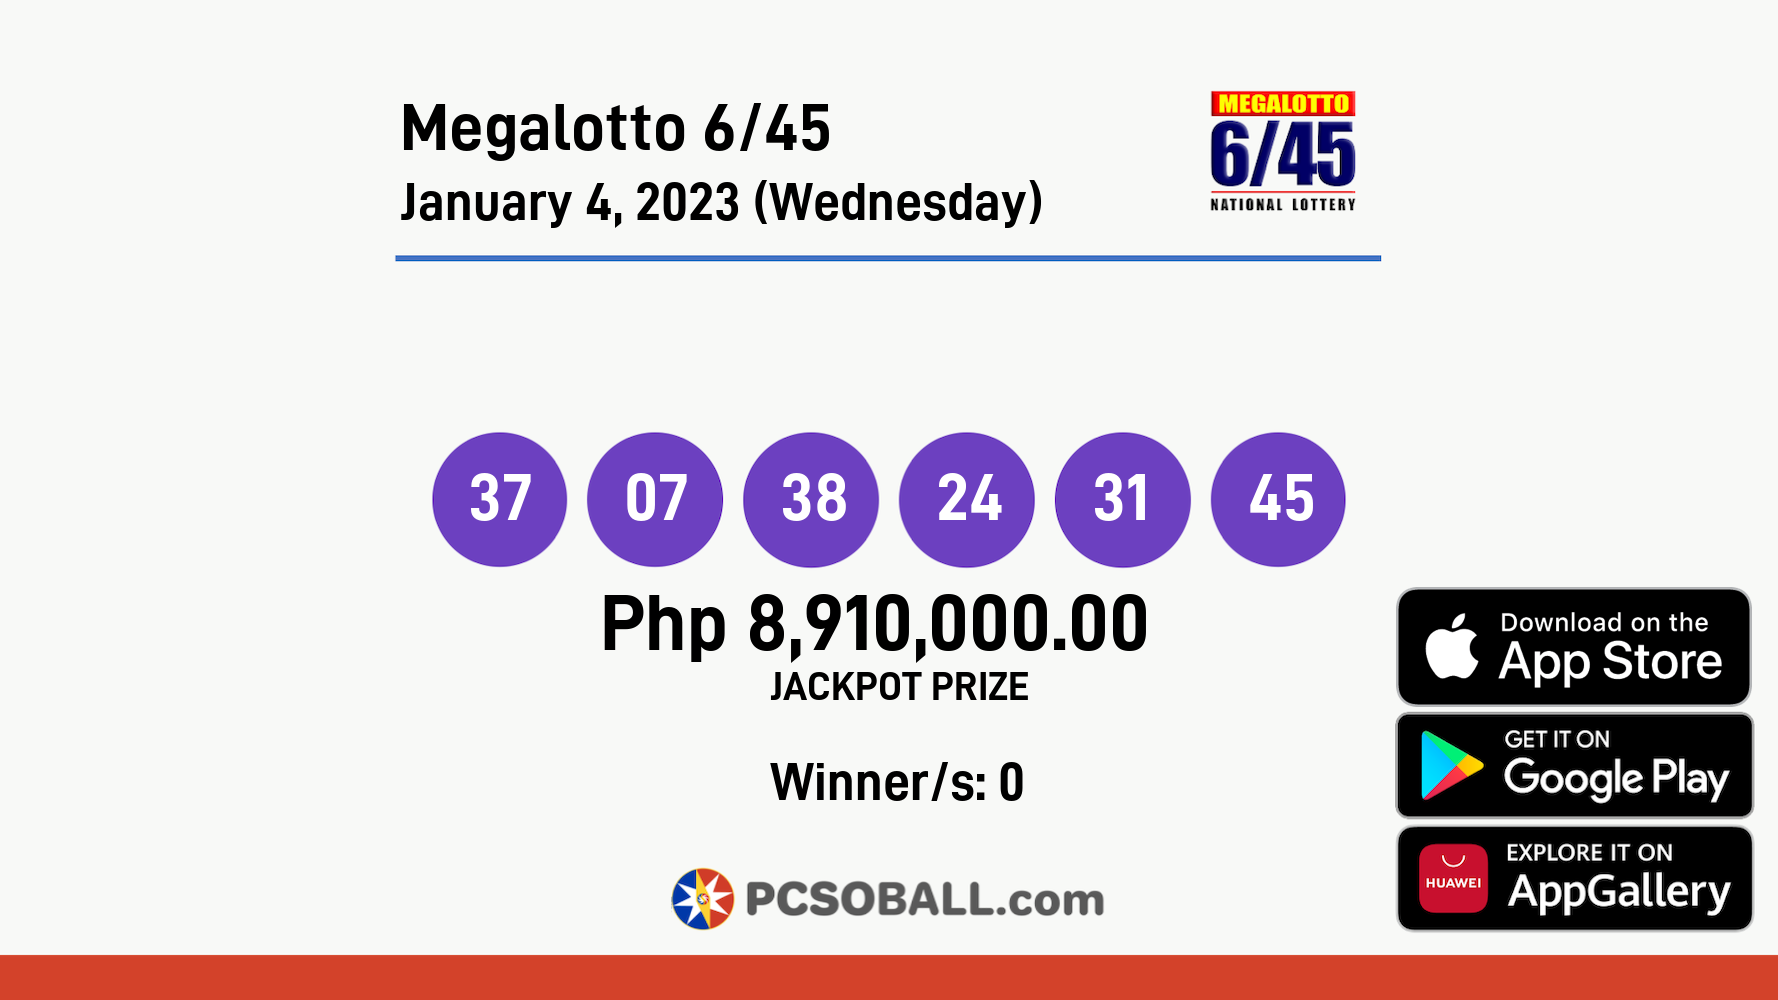 Megalotto 6/45 January 4, 2023 (Wednesday) Result